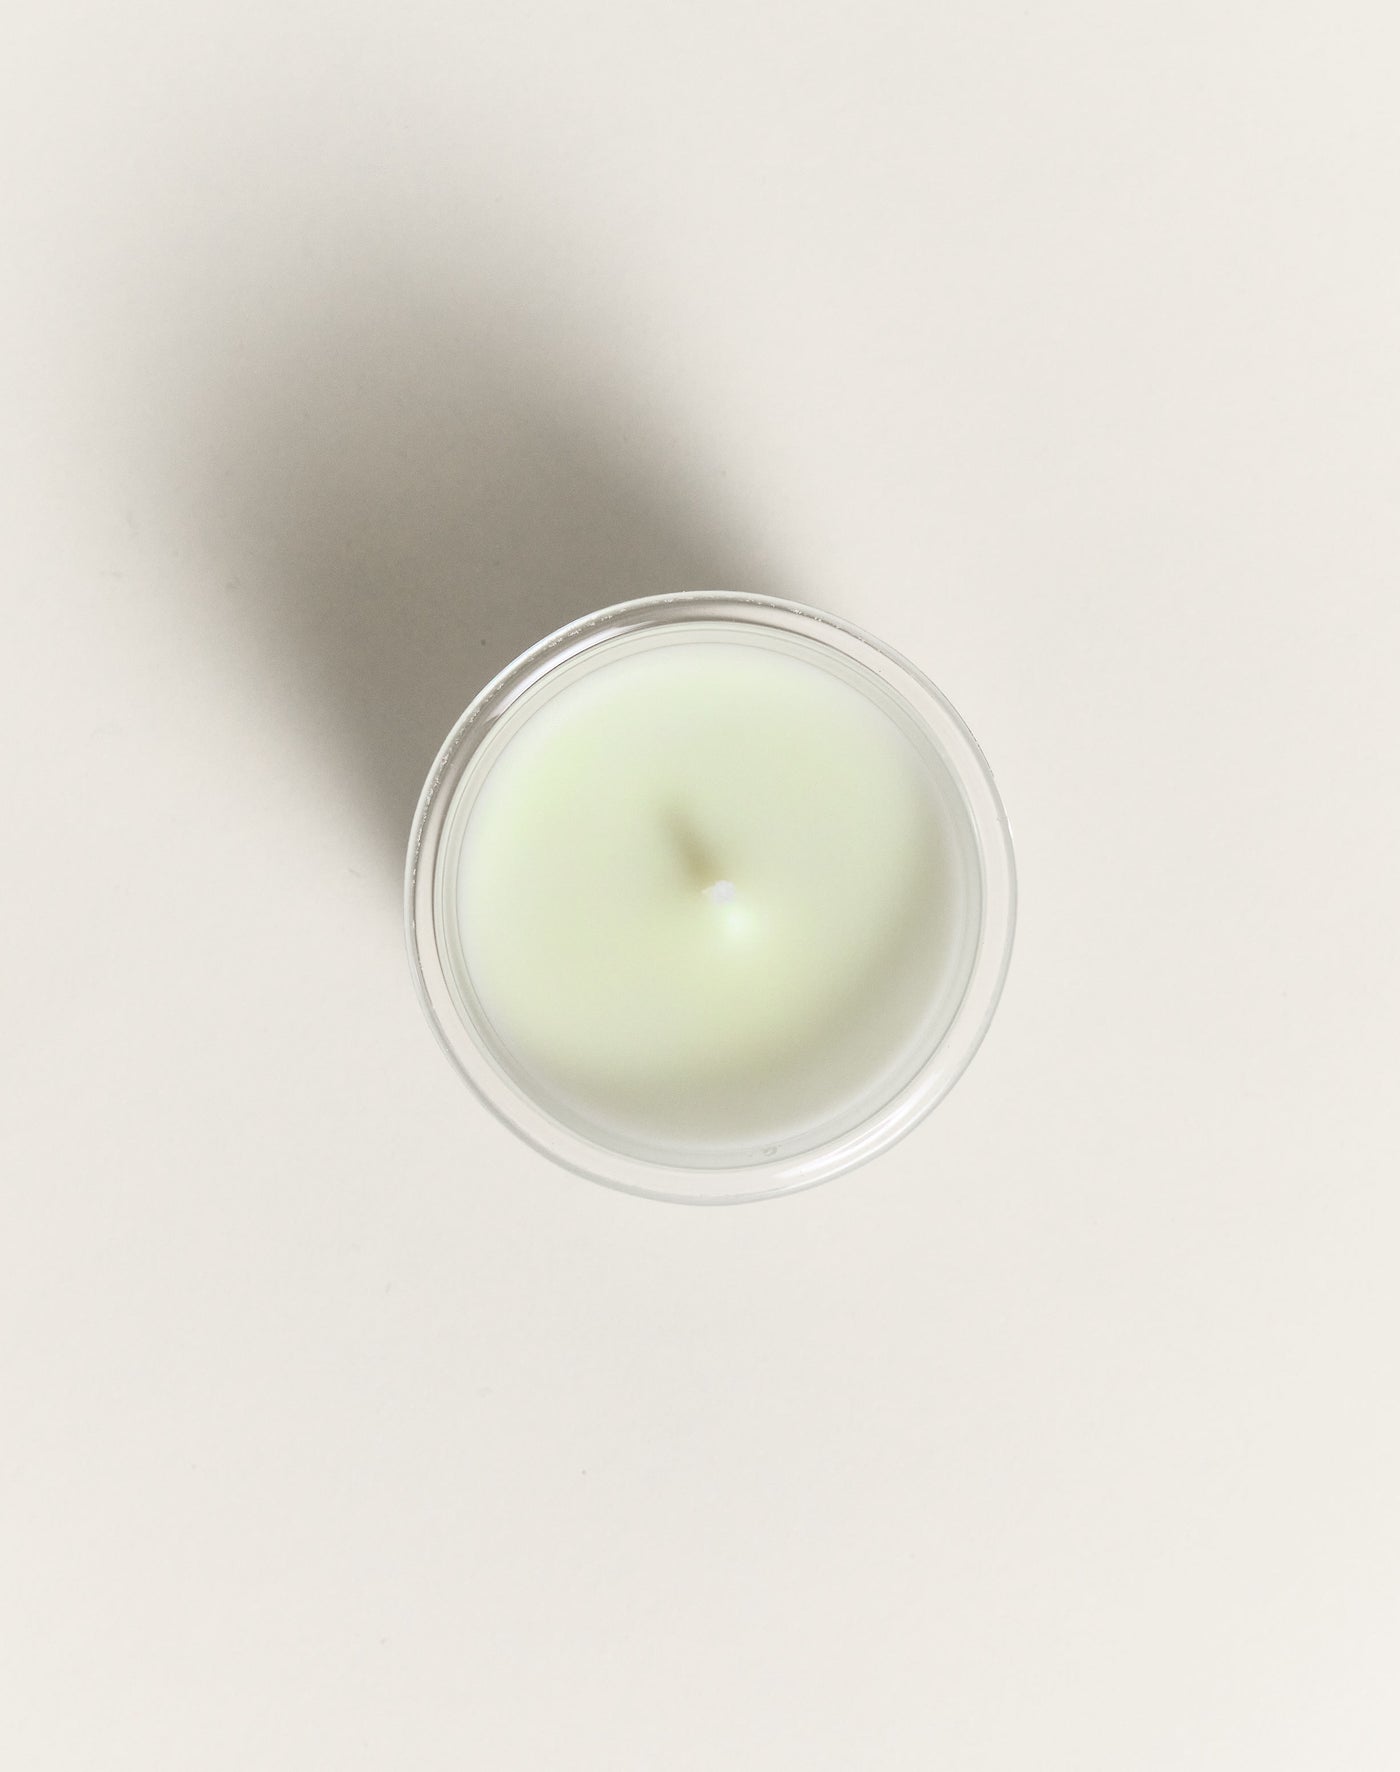 Peau d’Ailleurs Candle Refill by Starck